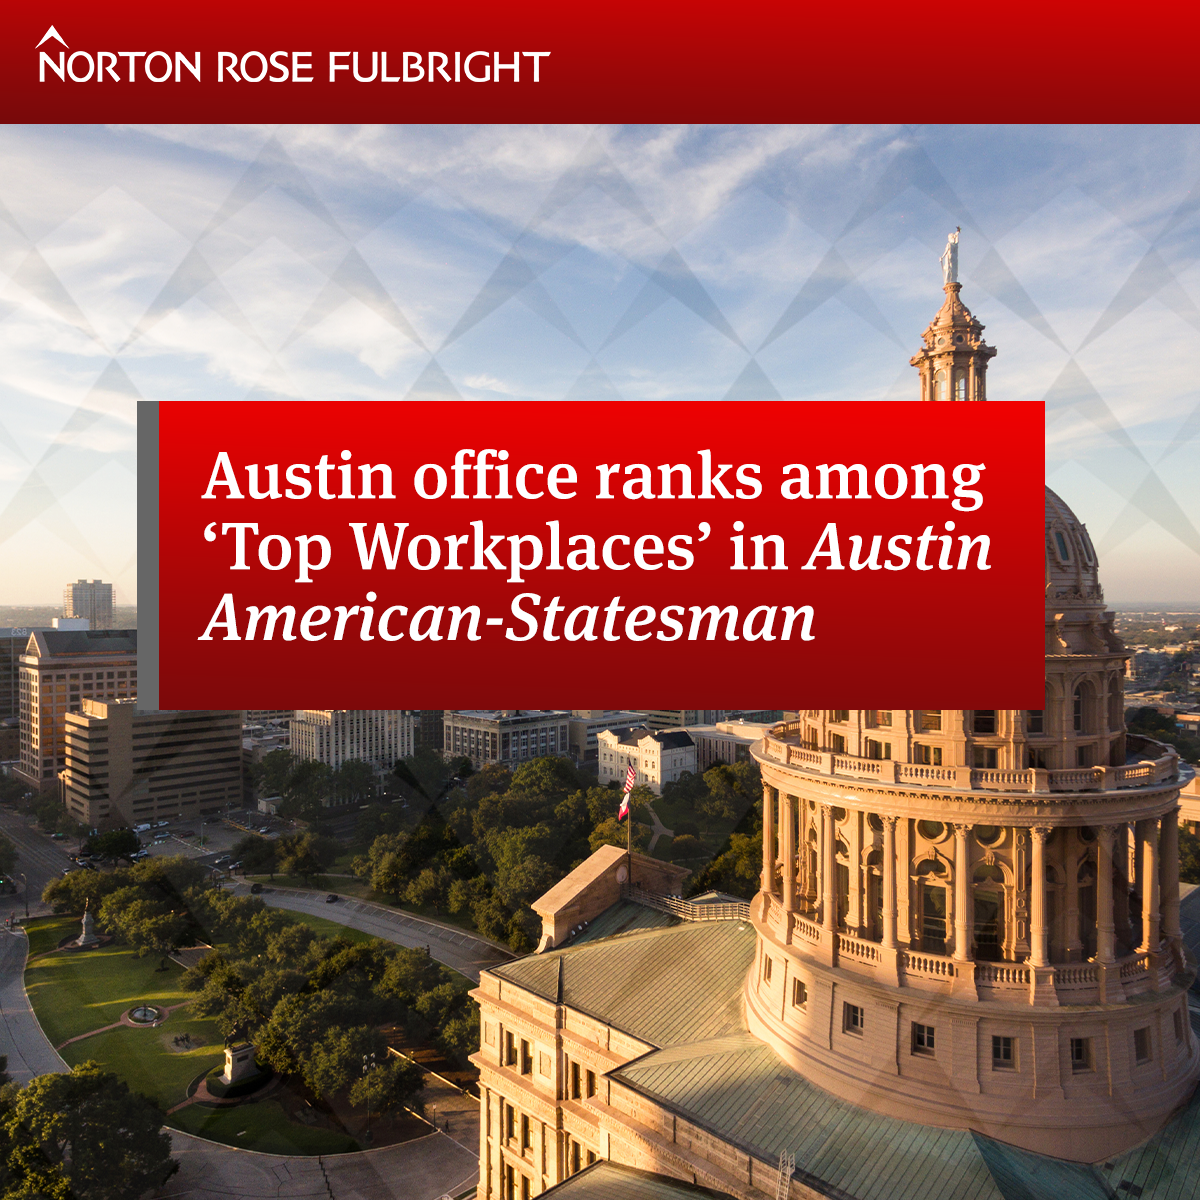 Austin office ranks among ‘Top Workplaces’ in Austin AmericanStatesman